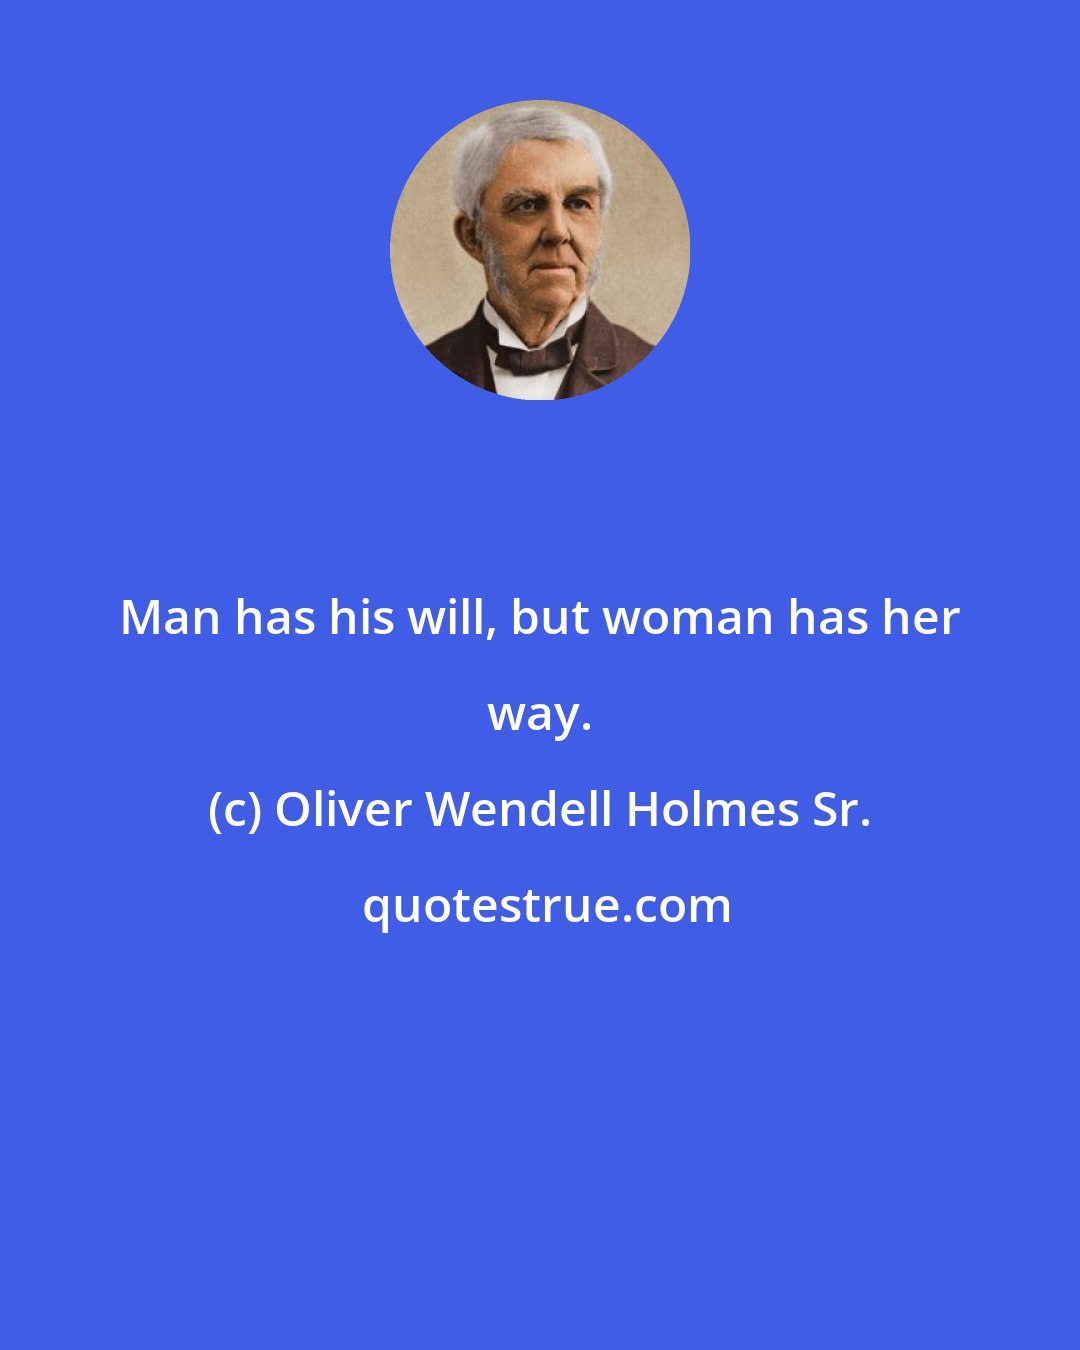 Oliver Wendell Holmes Sr.: Man has his will, but woman has her way.